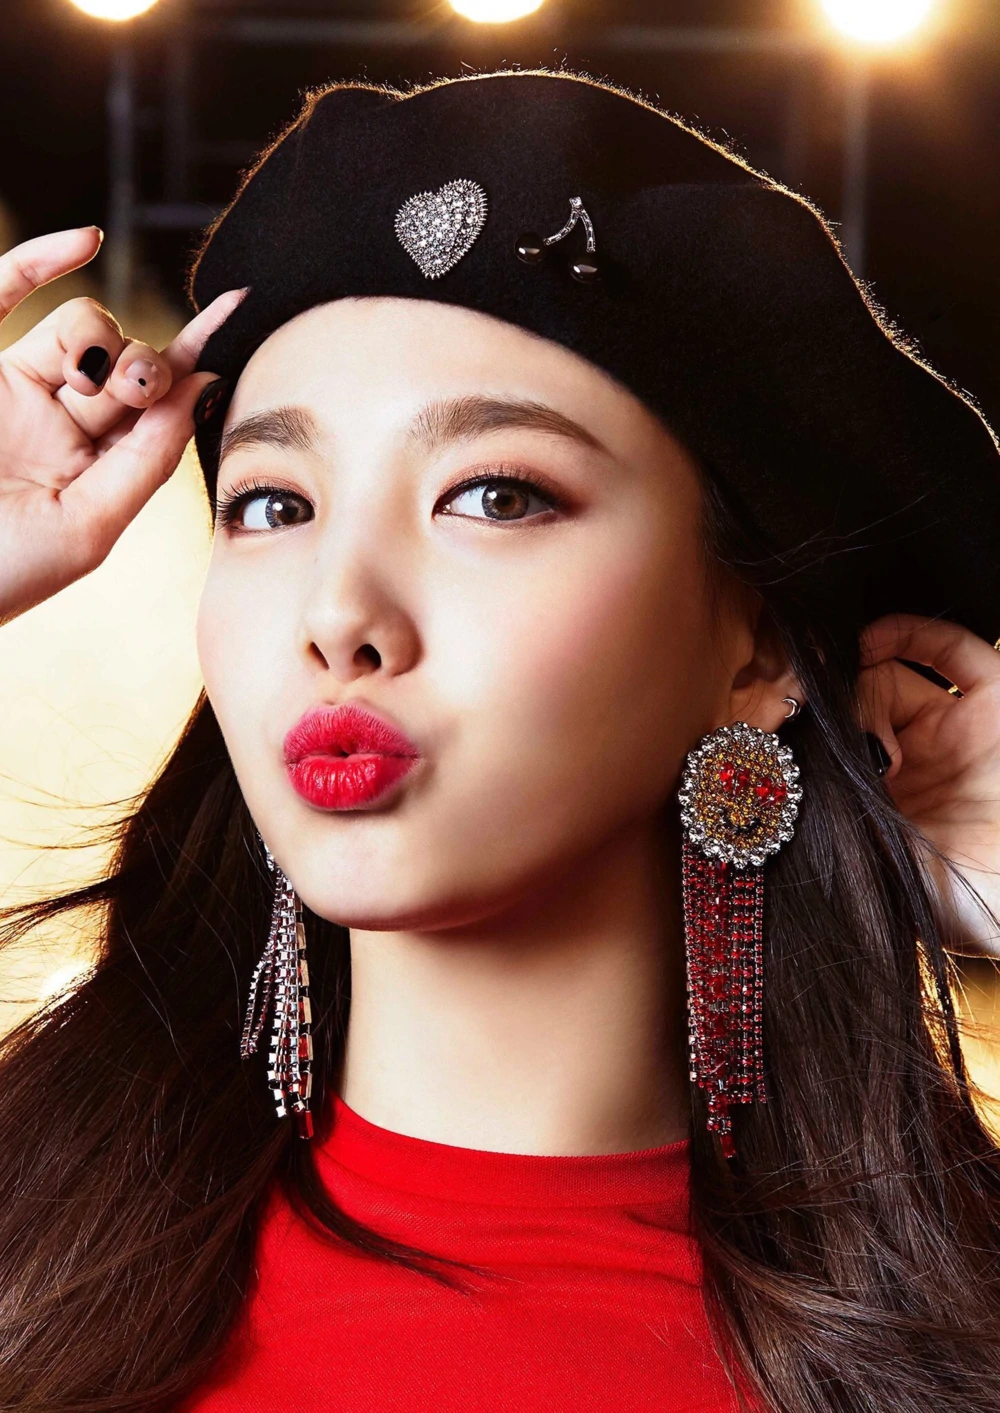 Twice Wake Me Up Nayeon Concept Teaser Picture Image Photo Kpop K-Concept